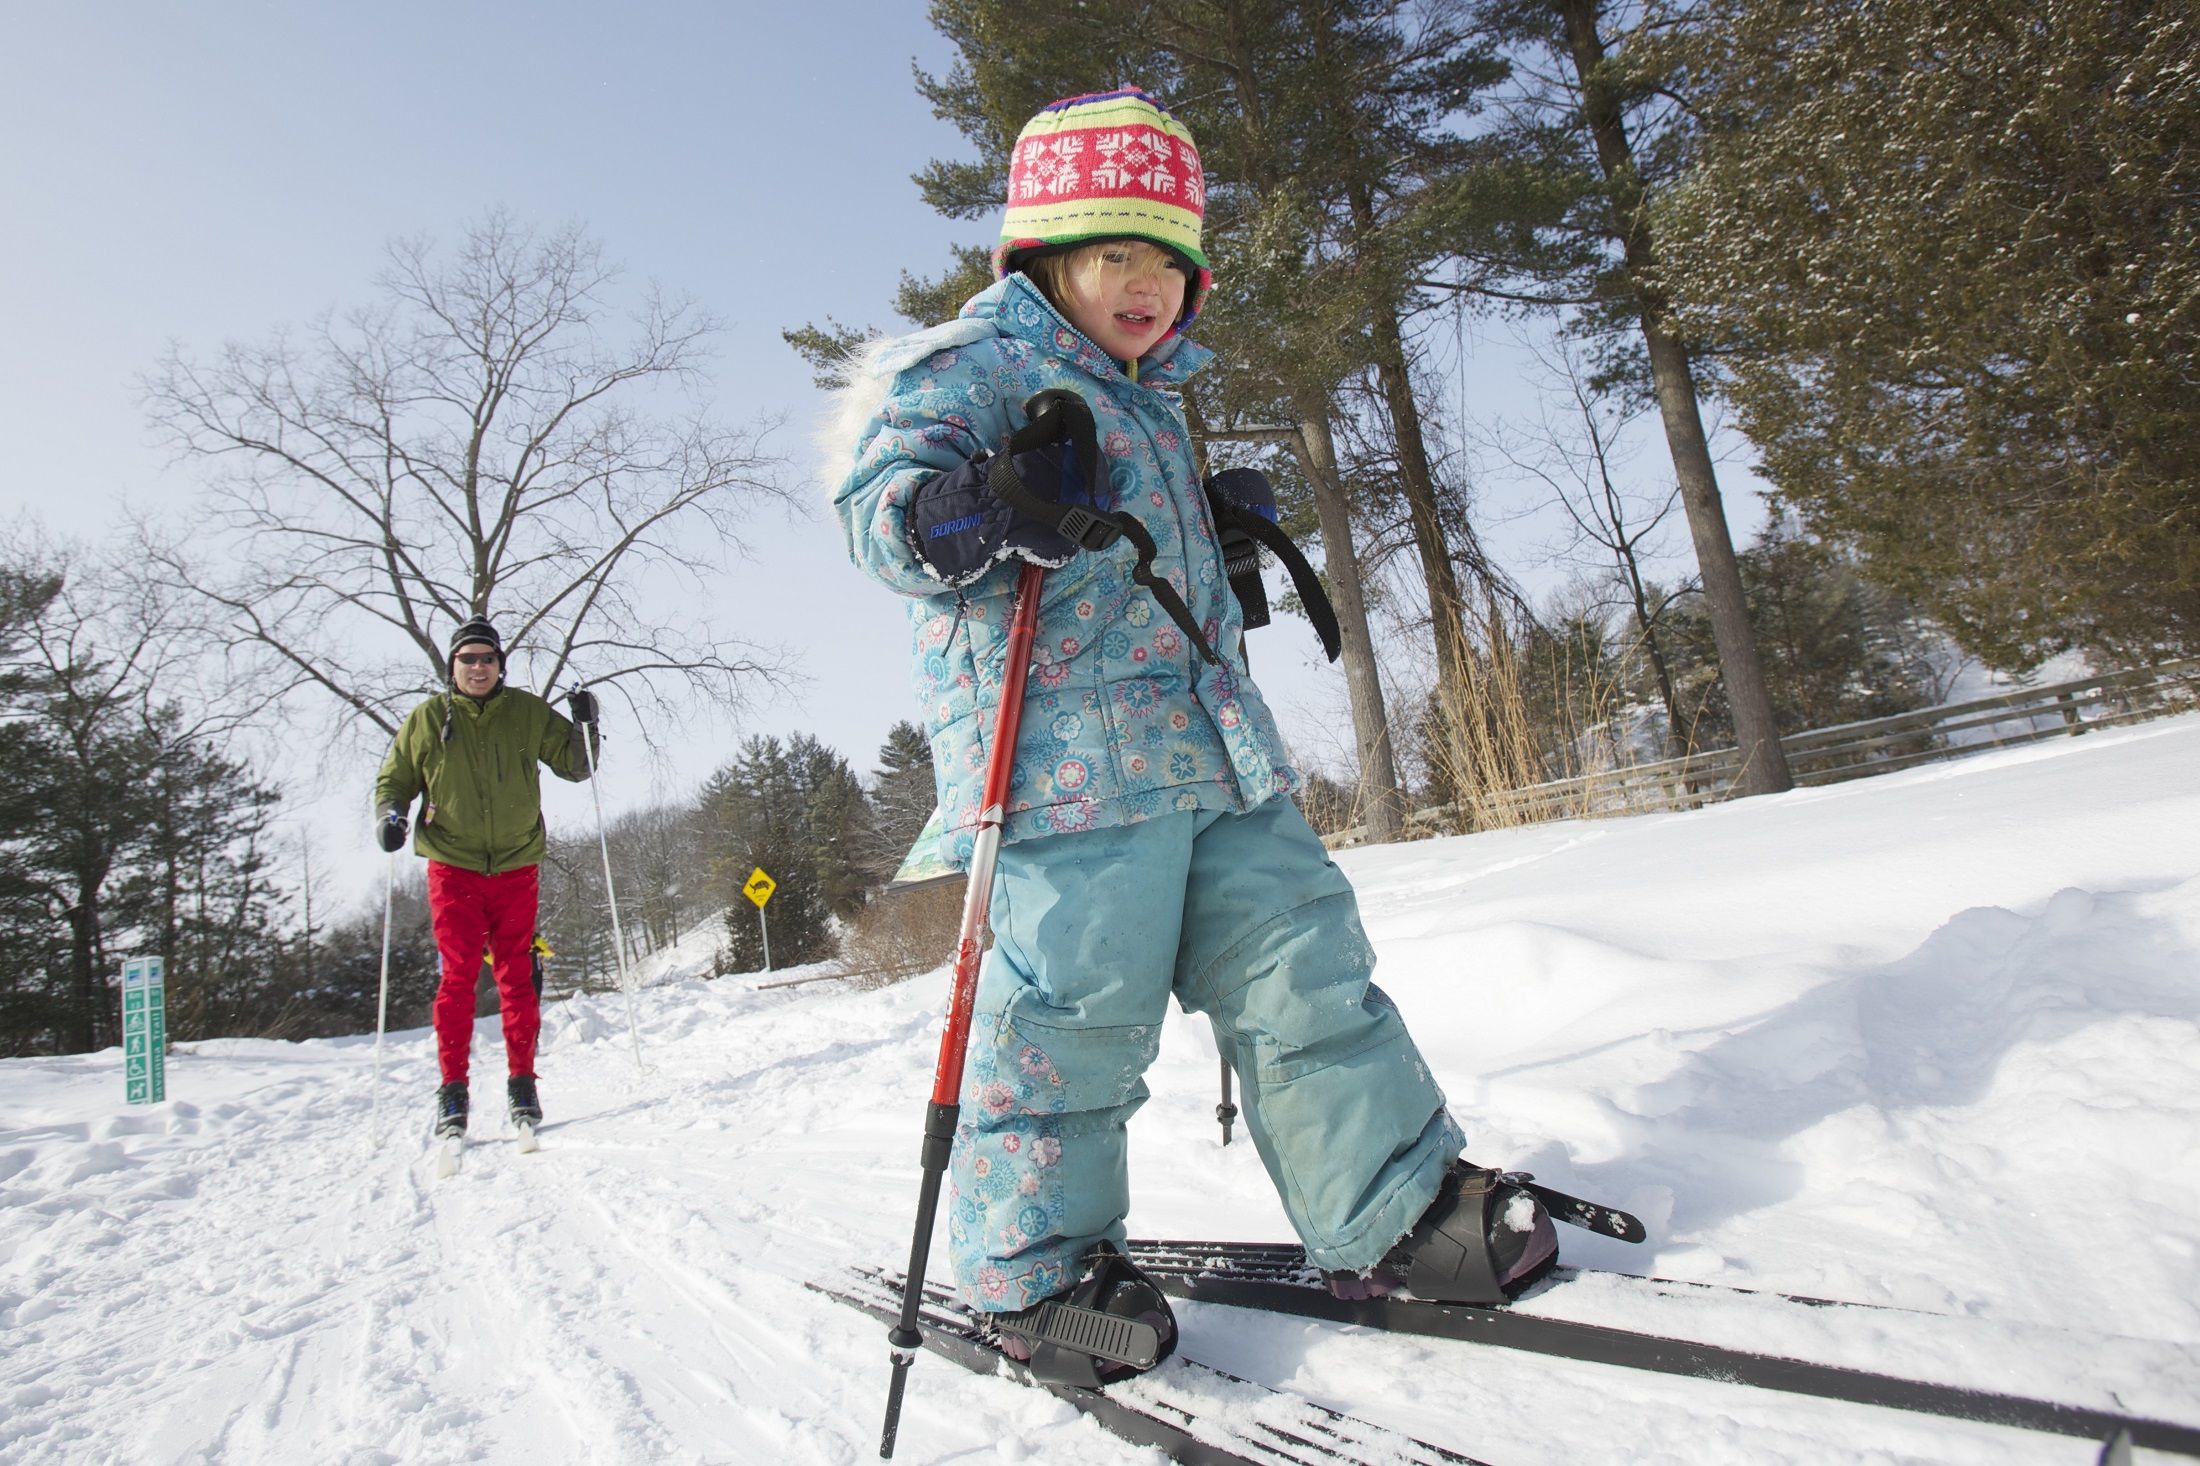 child and adult skiing in Pinery Provincial park